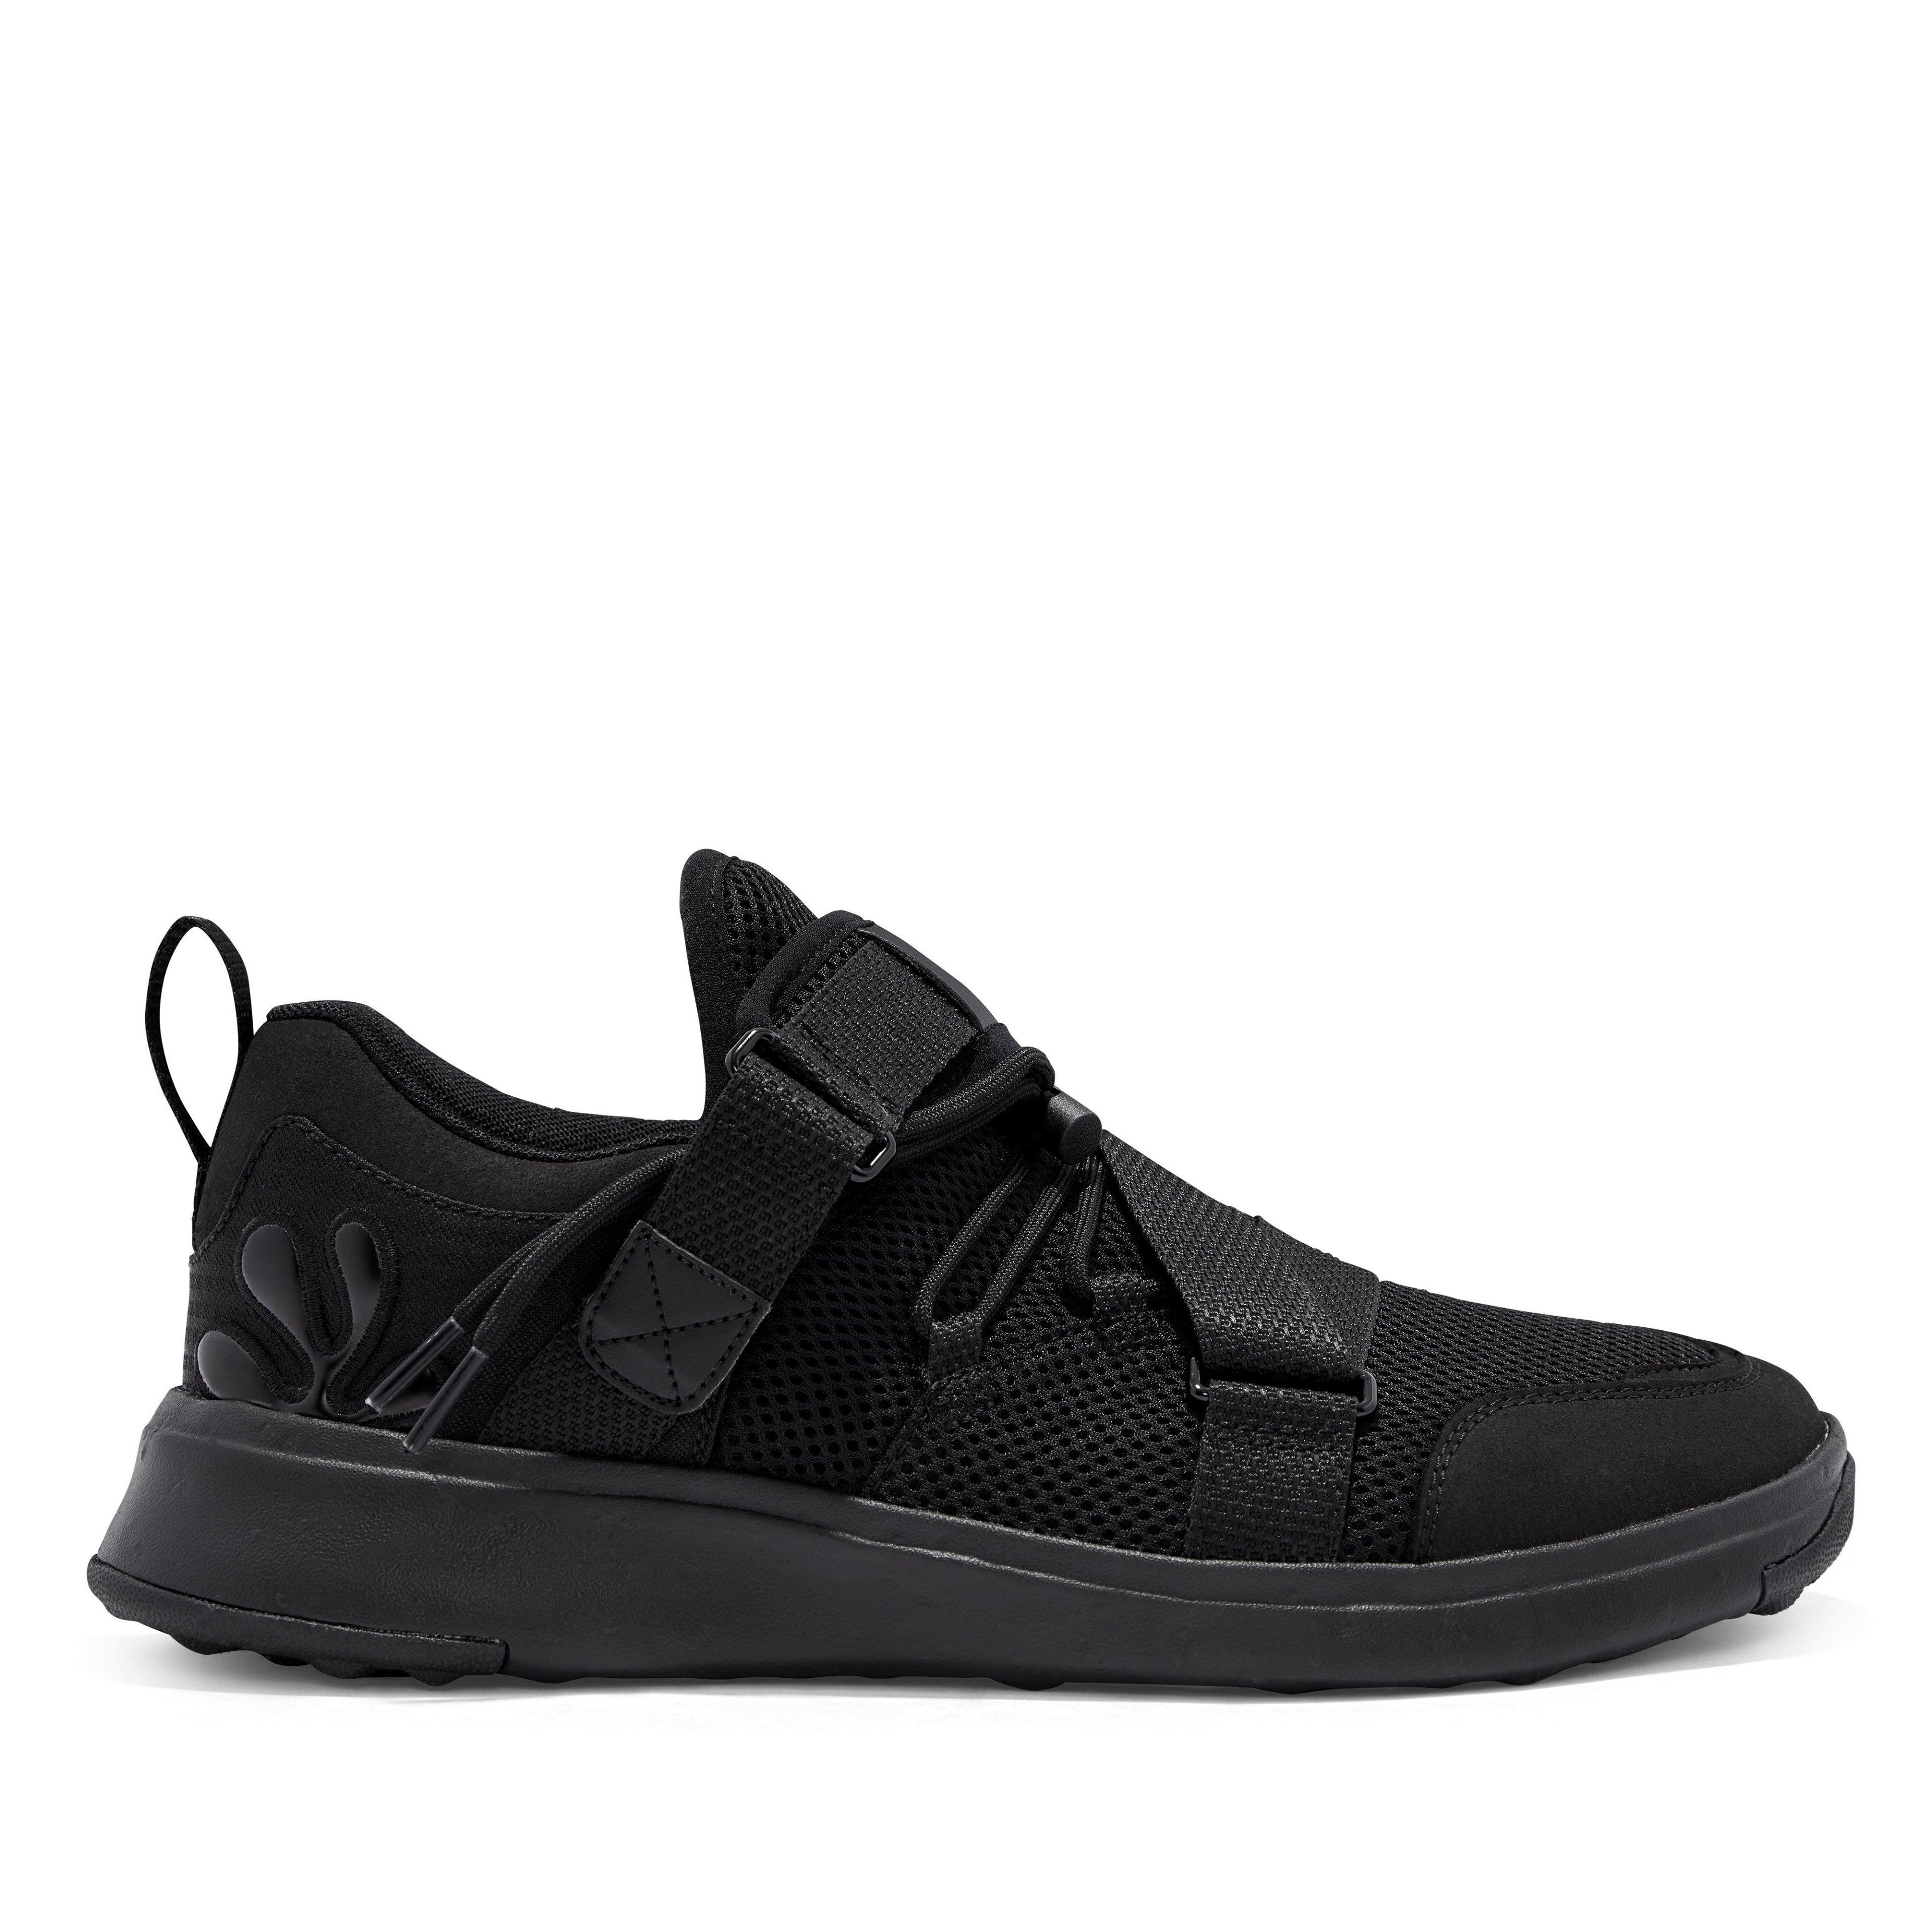 The Wasted Collective - S1L-001 Sneakers - (Black) by WASTED COLLECTIVE